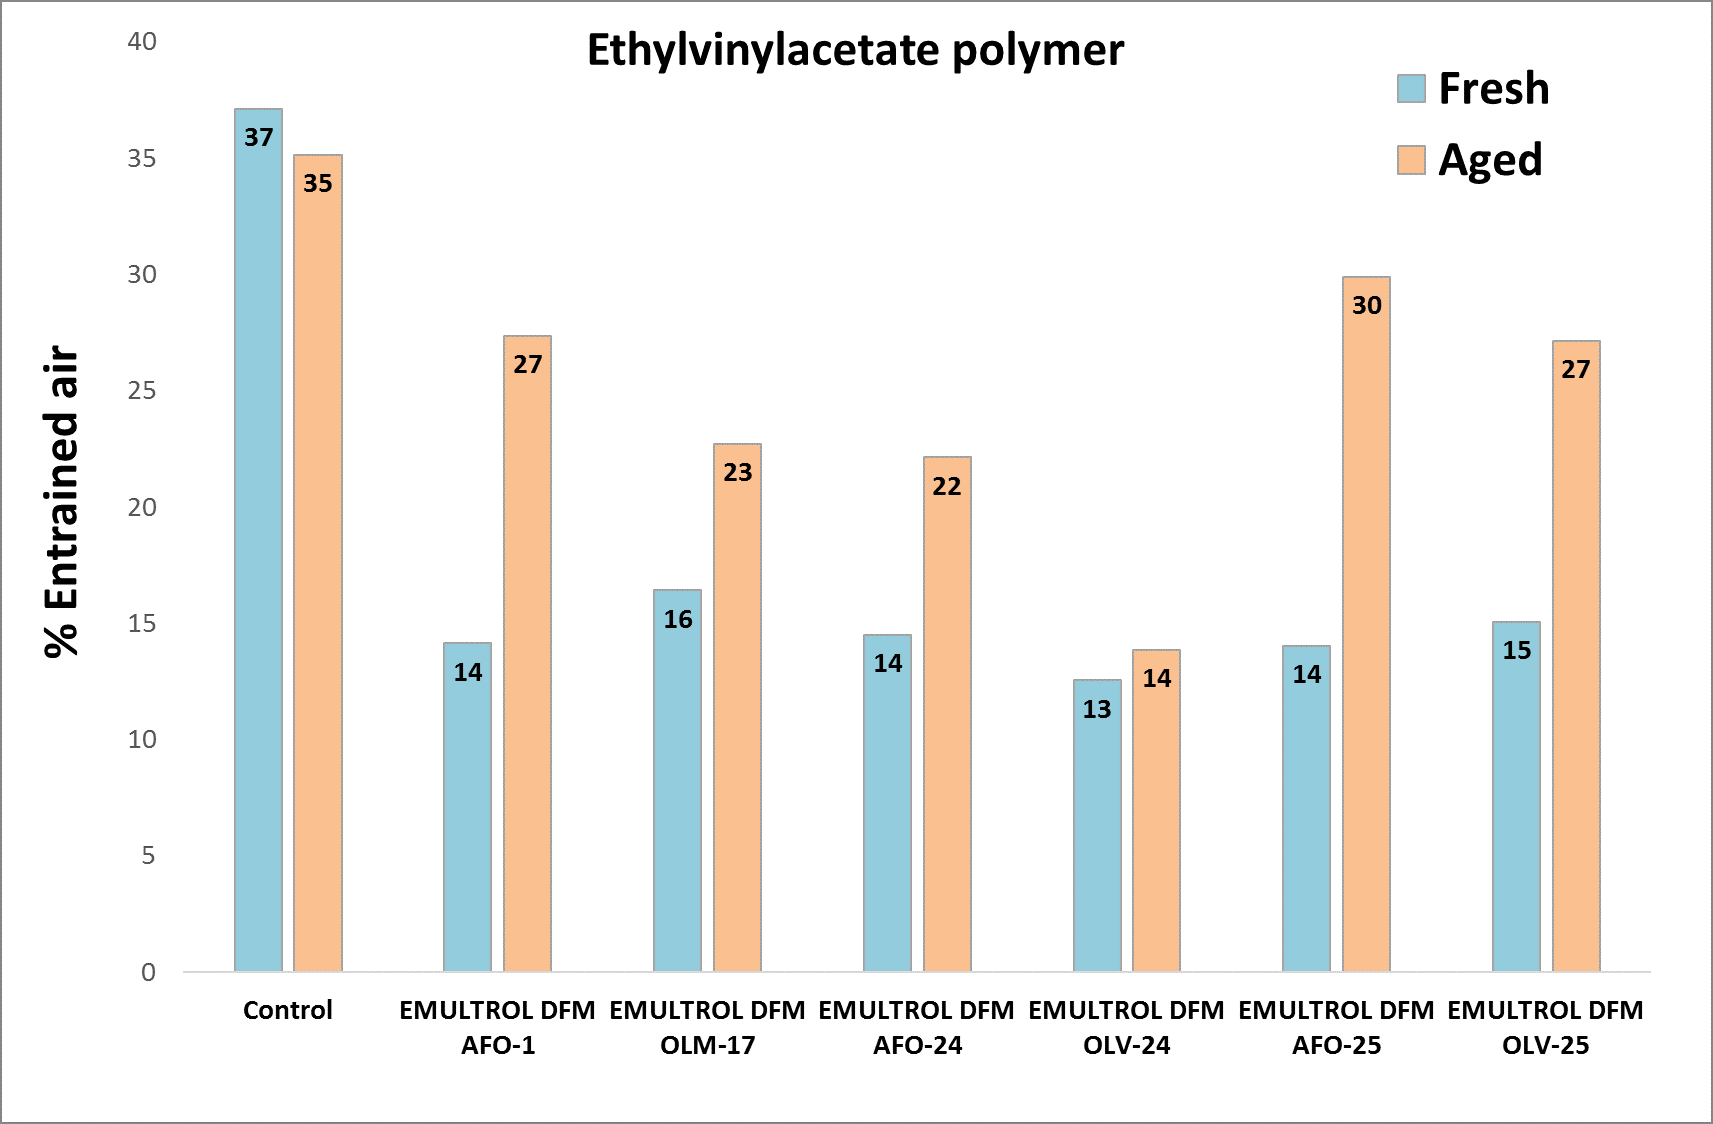 The results of the anti-foam effectiveness tests on 4 standard water based polymer dispersions of the paints and coatings industry are shown, showing both the effectiveness of the fresh test (blue) and the test after the aging of the polymer dispersion (orange).